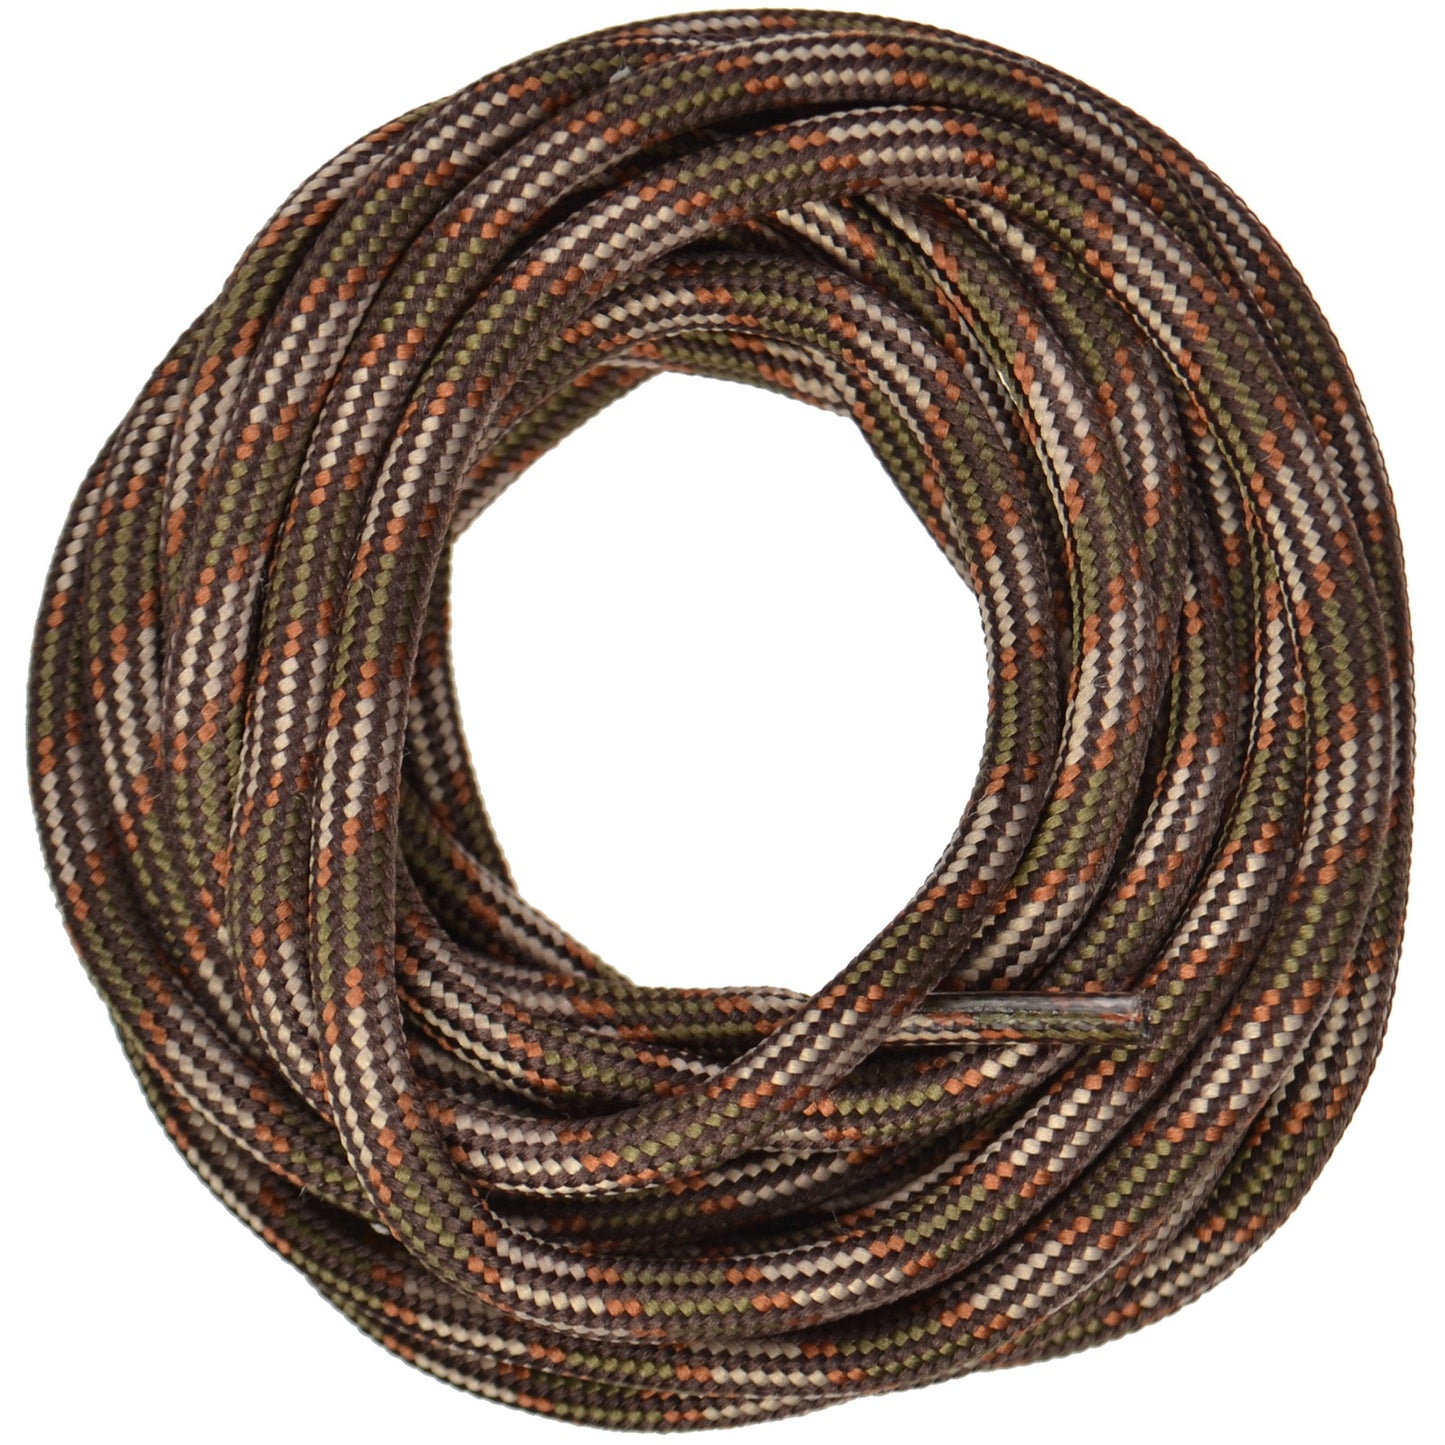 150cm Worksite Cord Work Boot Shoe Laces - Multi Brown